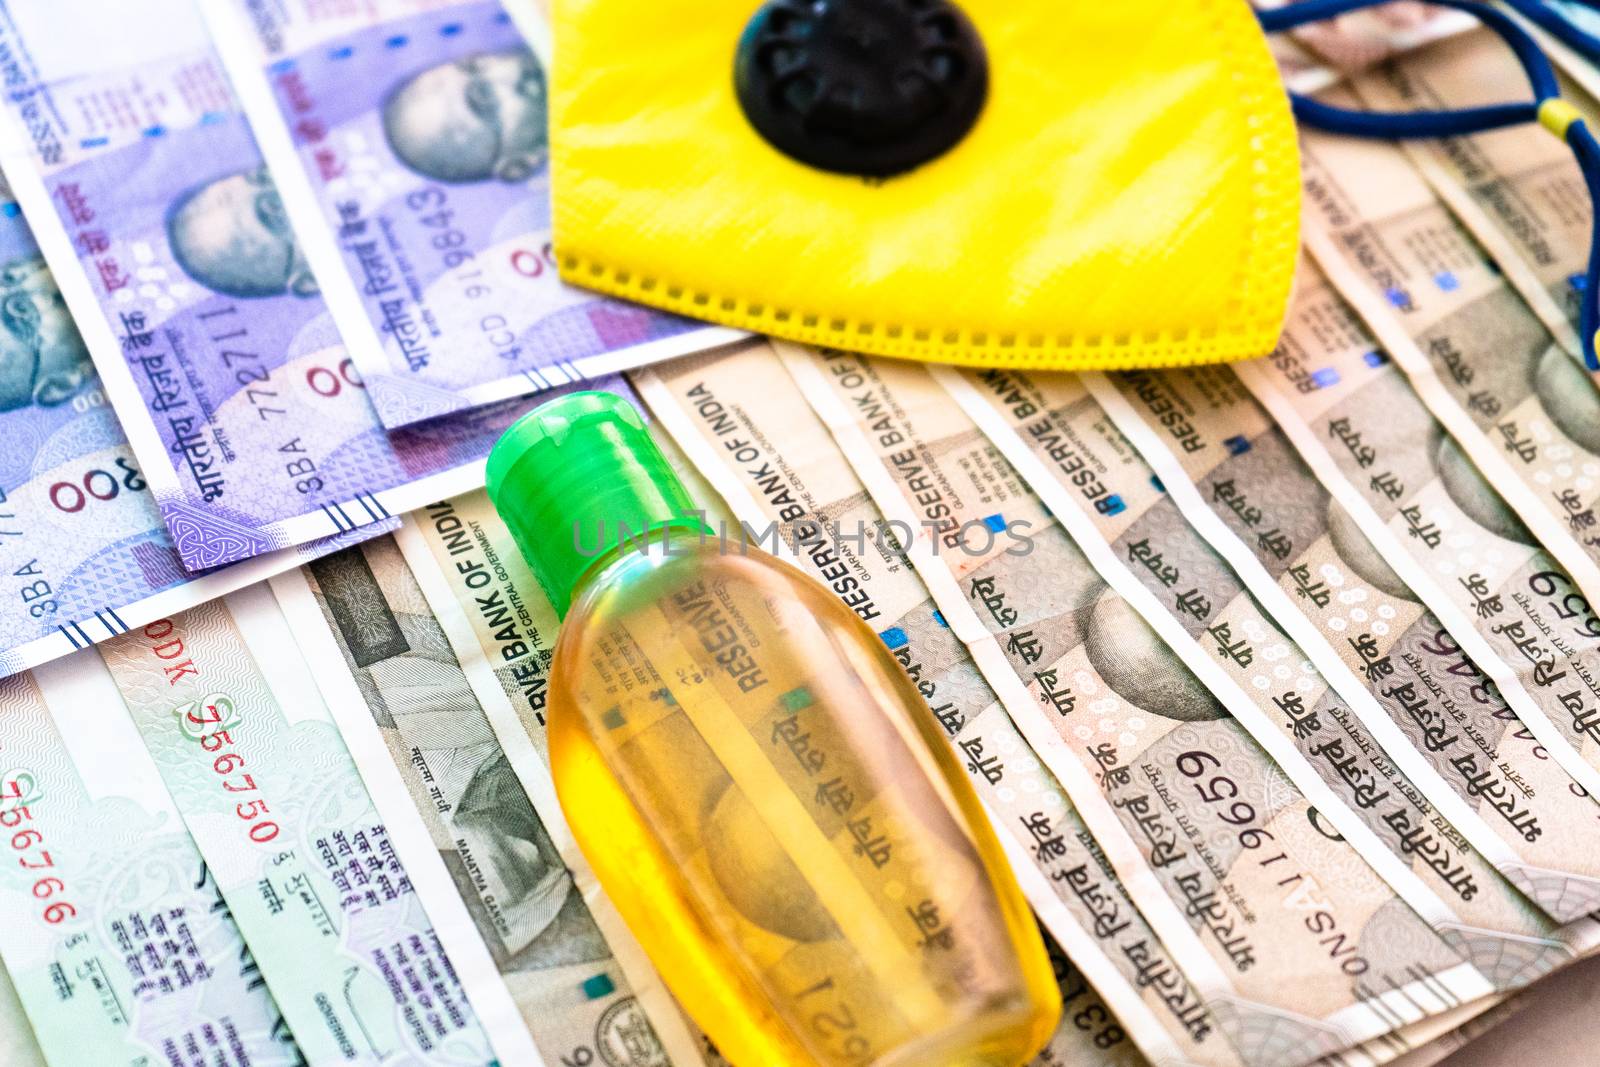 Safety and business essentials yellow mask and sanitizer placed on bed of indian currency. Showing the high price, essentials, large business of manufacturing personal protective essentials or value of health concept